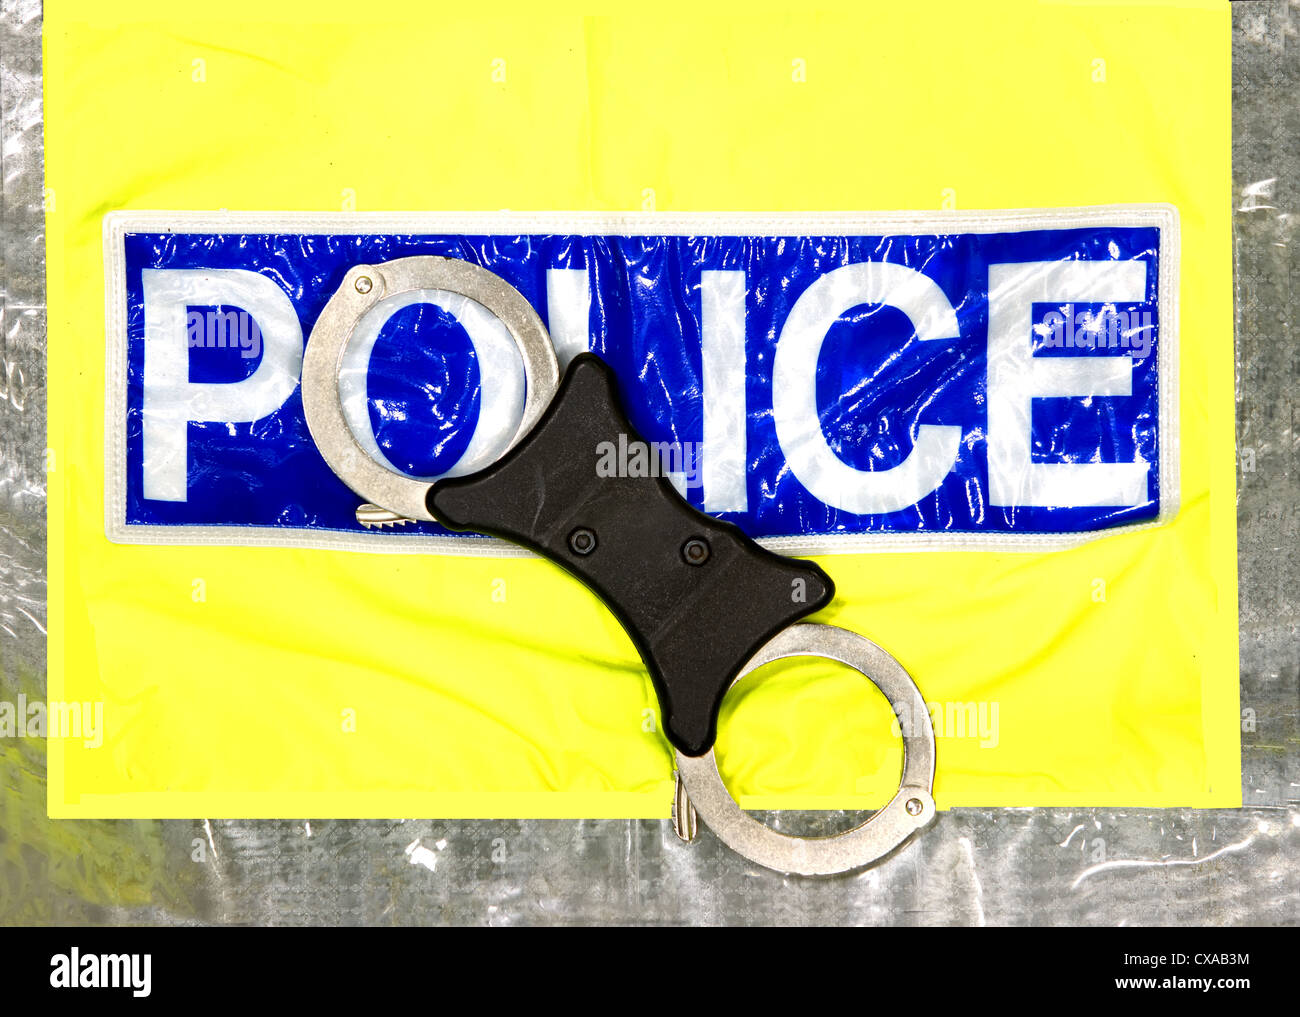 police hand cuffs and a yellow high visibility jacket Stock Photo